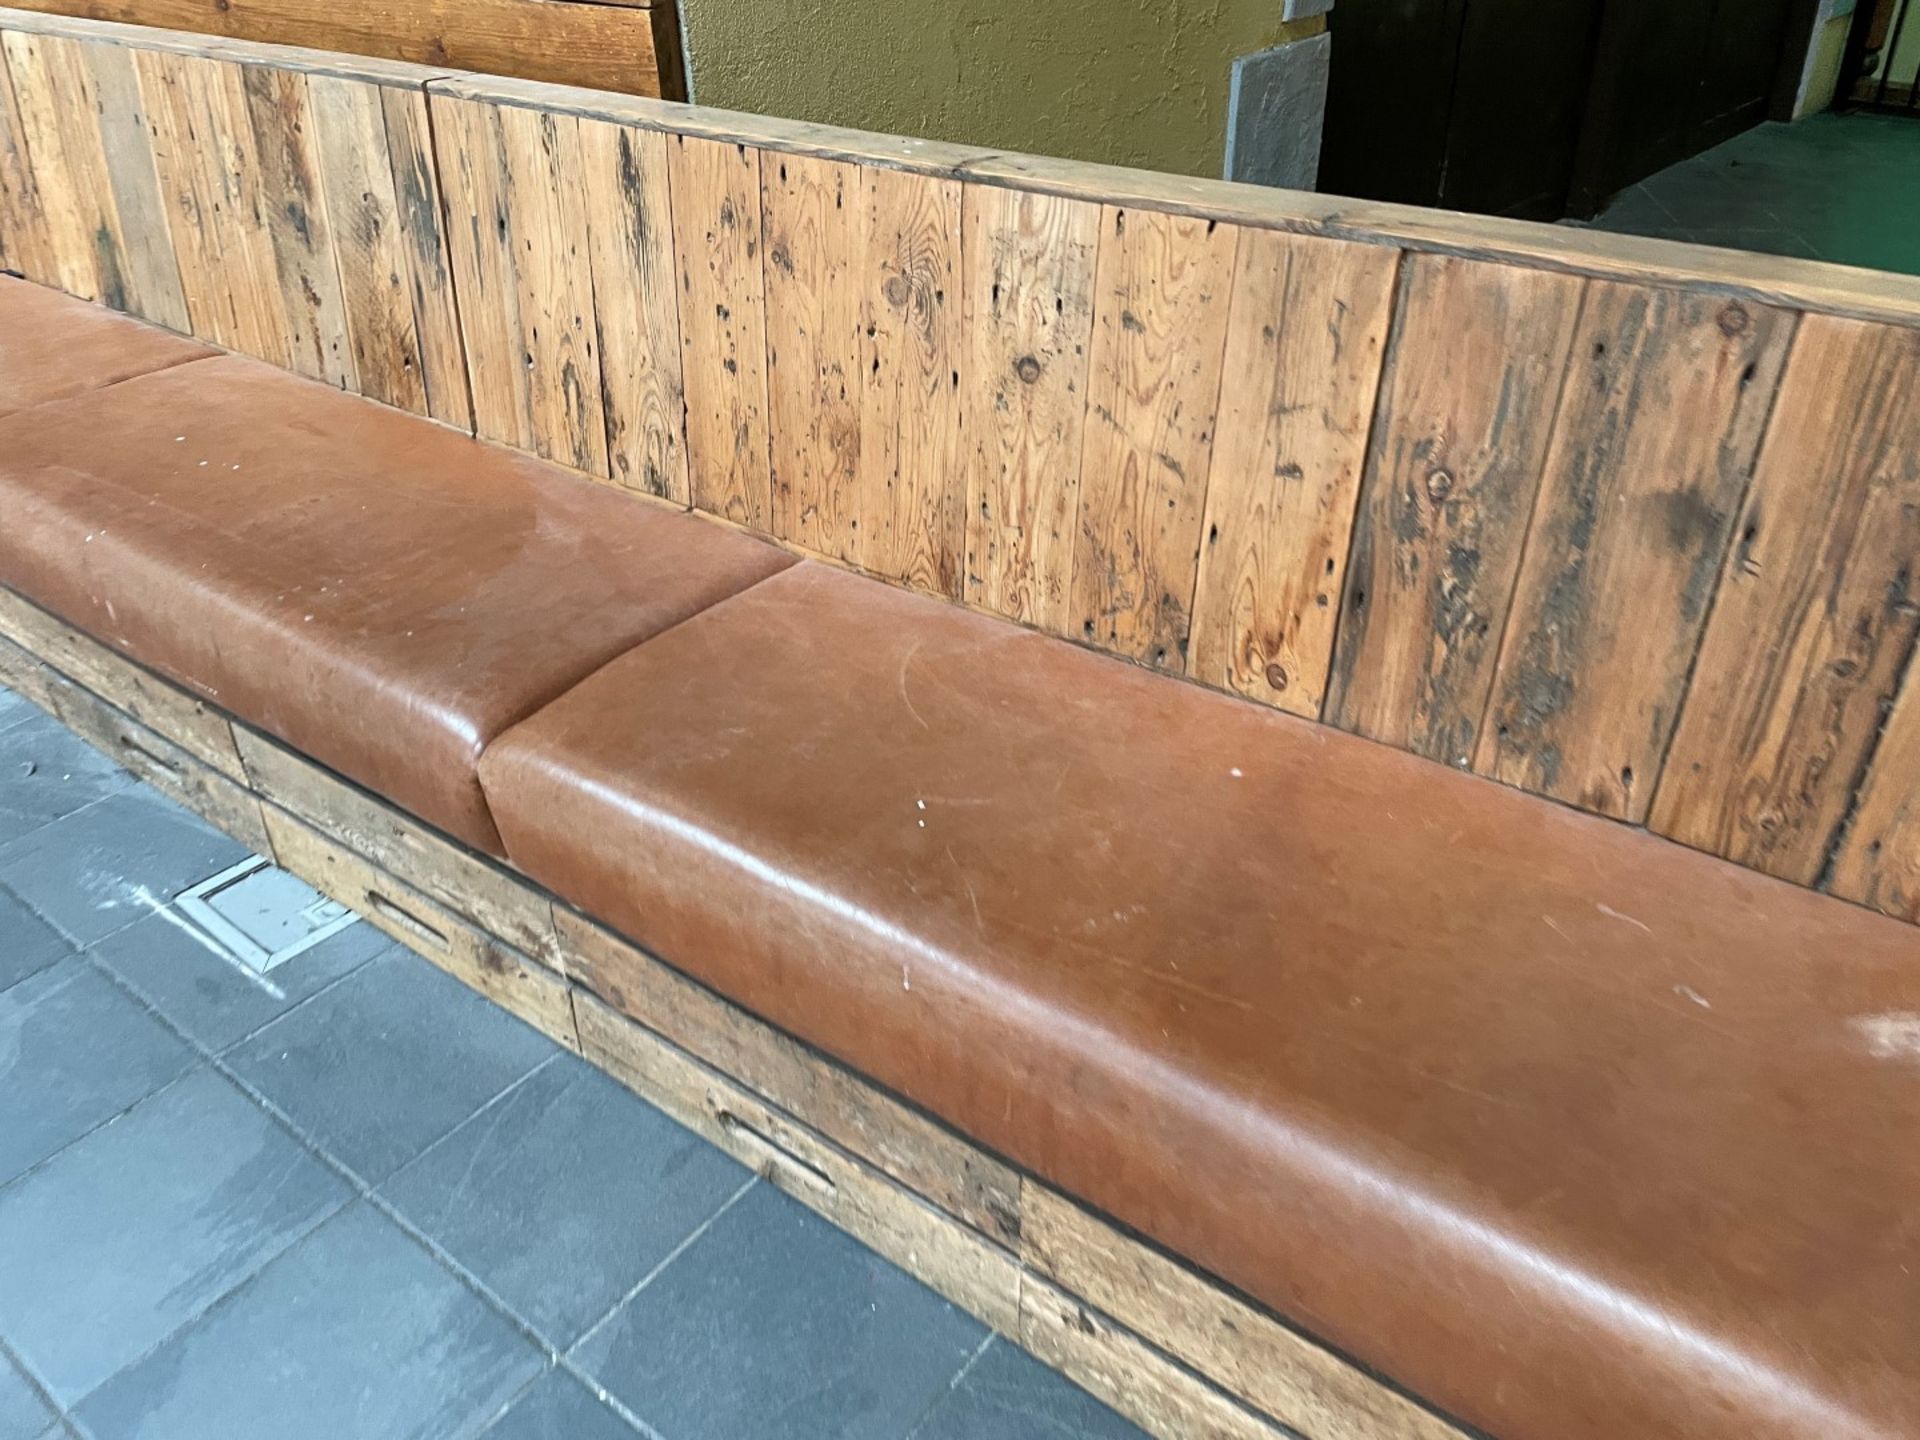 1 x Rustic Wooden Seating Bench Featuring Tan Leather Seat Pads - Suitable For Restaurants or Bars! - Image 3 of 12